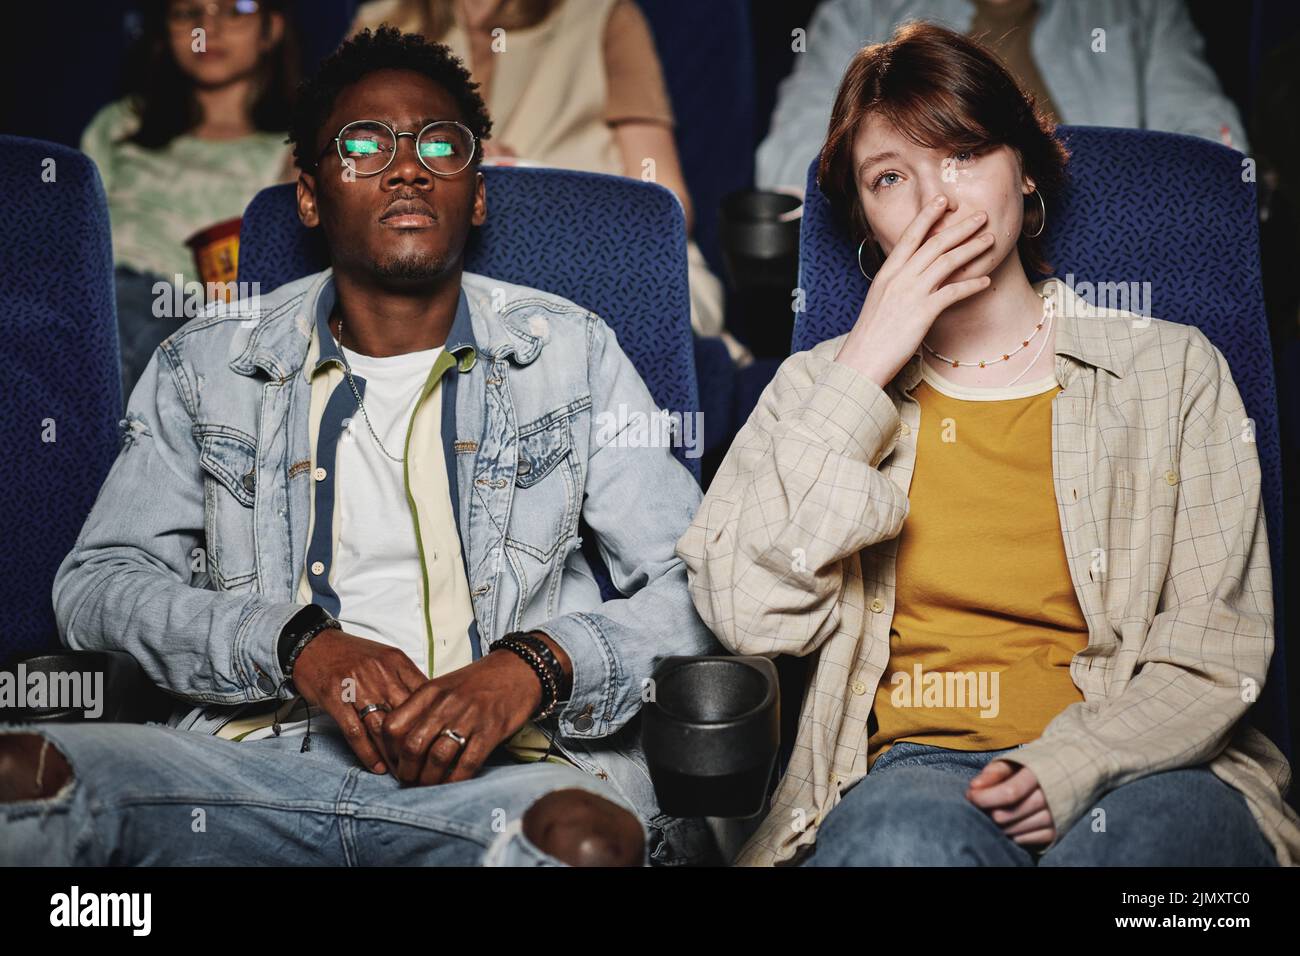 Young Black man and his Caucasian female friend watching sad drama movie in cinema, young woman crying Stock Photo